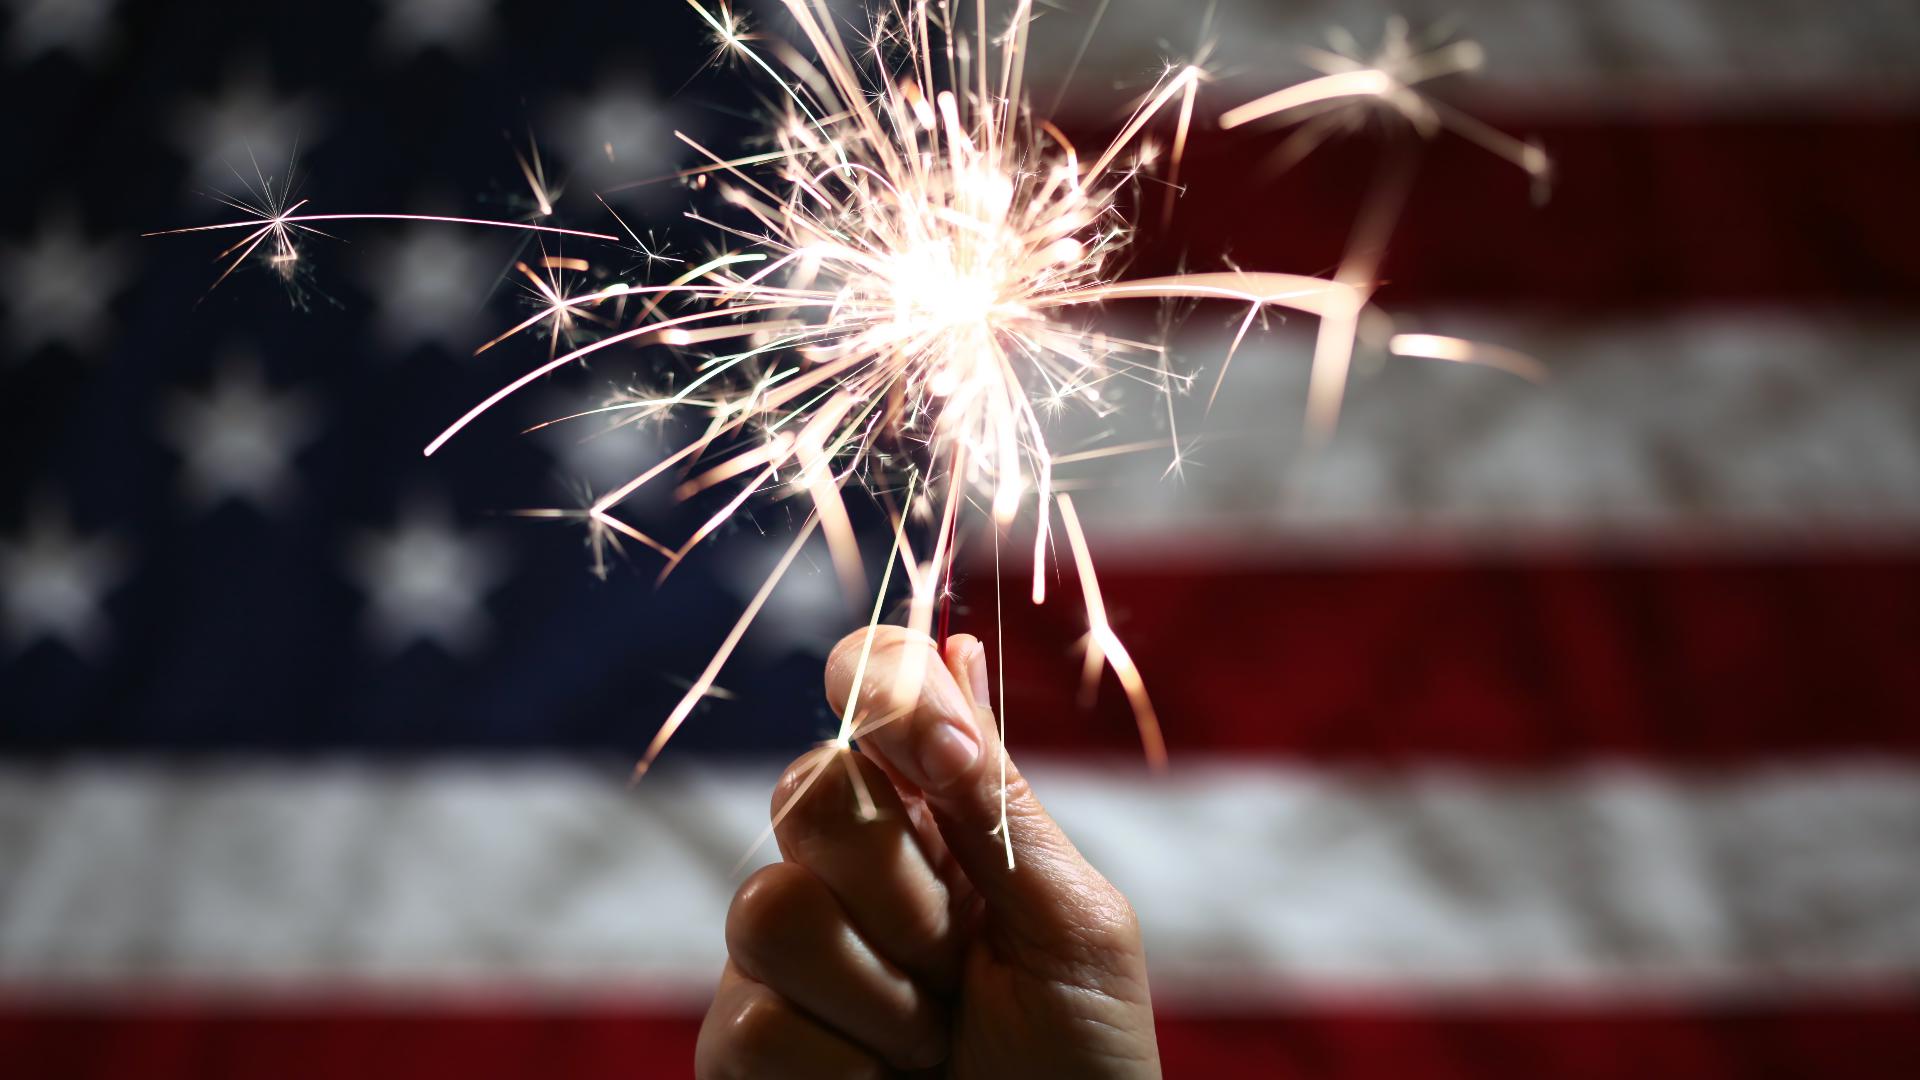 Many injuries occur on the fourth of July as many mishandle fireworks.